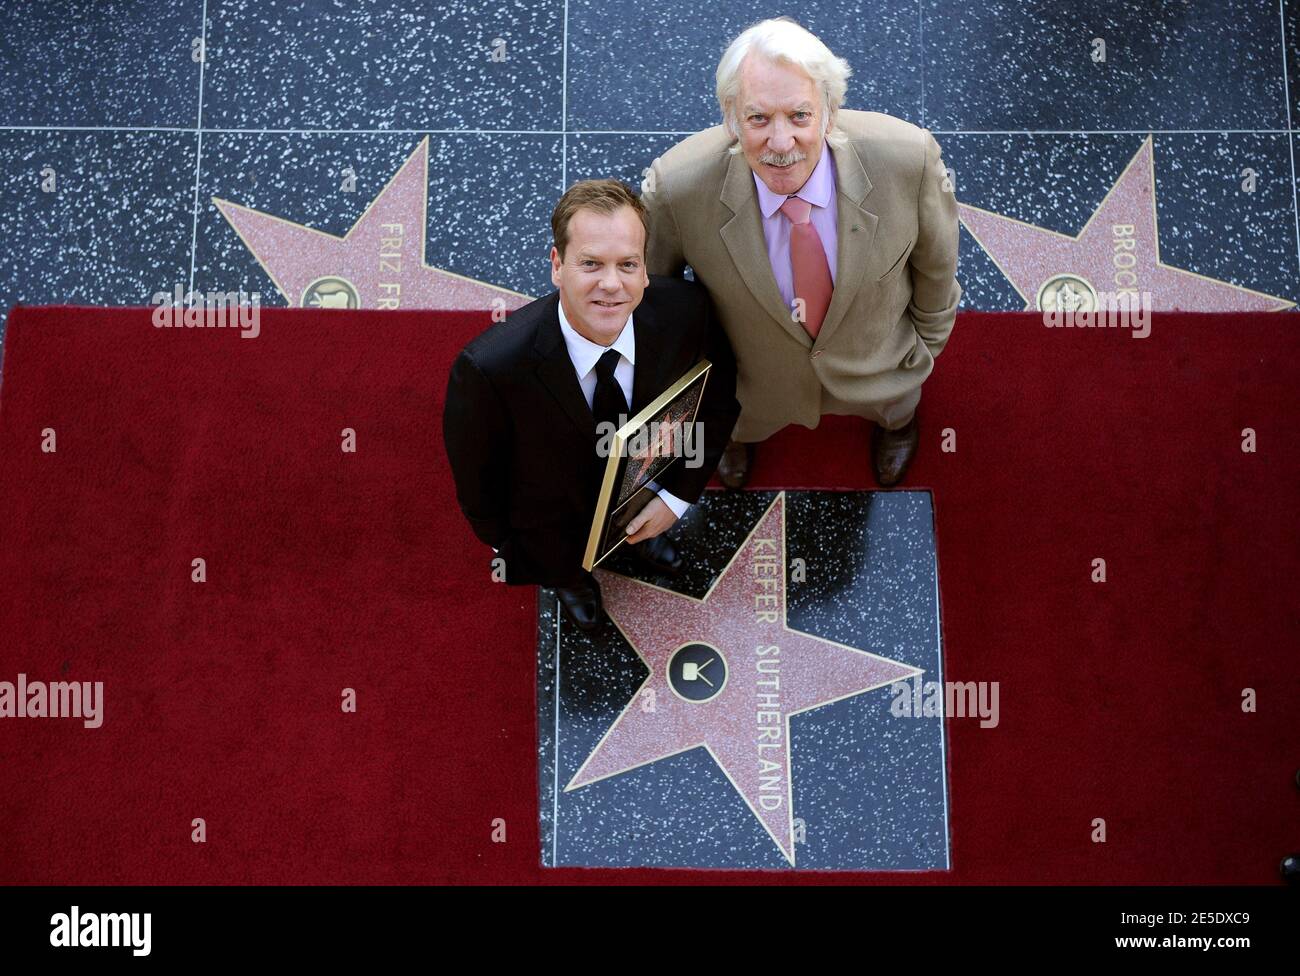 Kiefer Sutherland is honored with the 2,377th star on the walk of fame in Hollywood, Los Angeles, CA, USA on December 9, 2008. Photo by Lionel Hahn/ABACAPRESS.COM Stock Photo